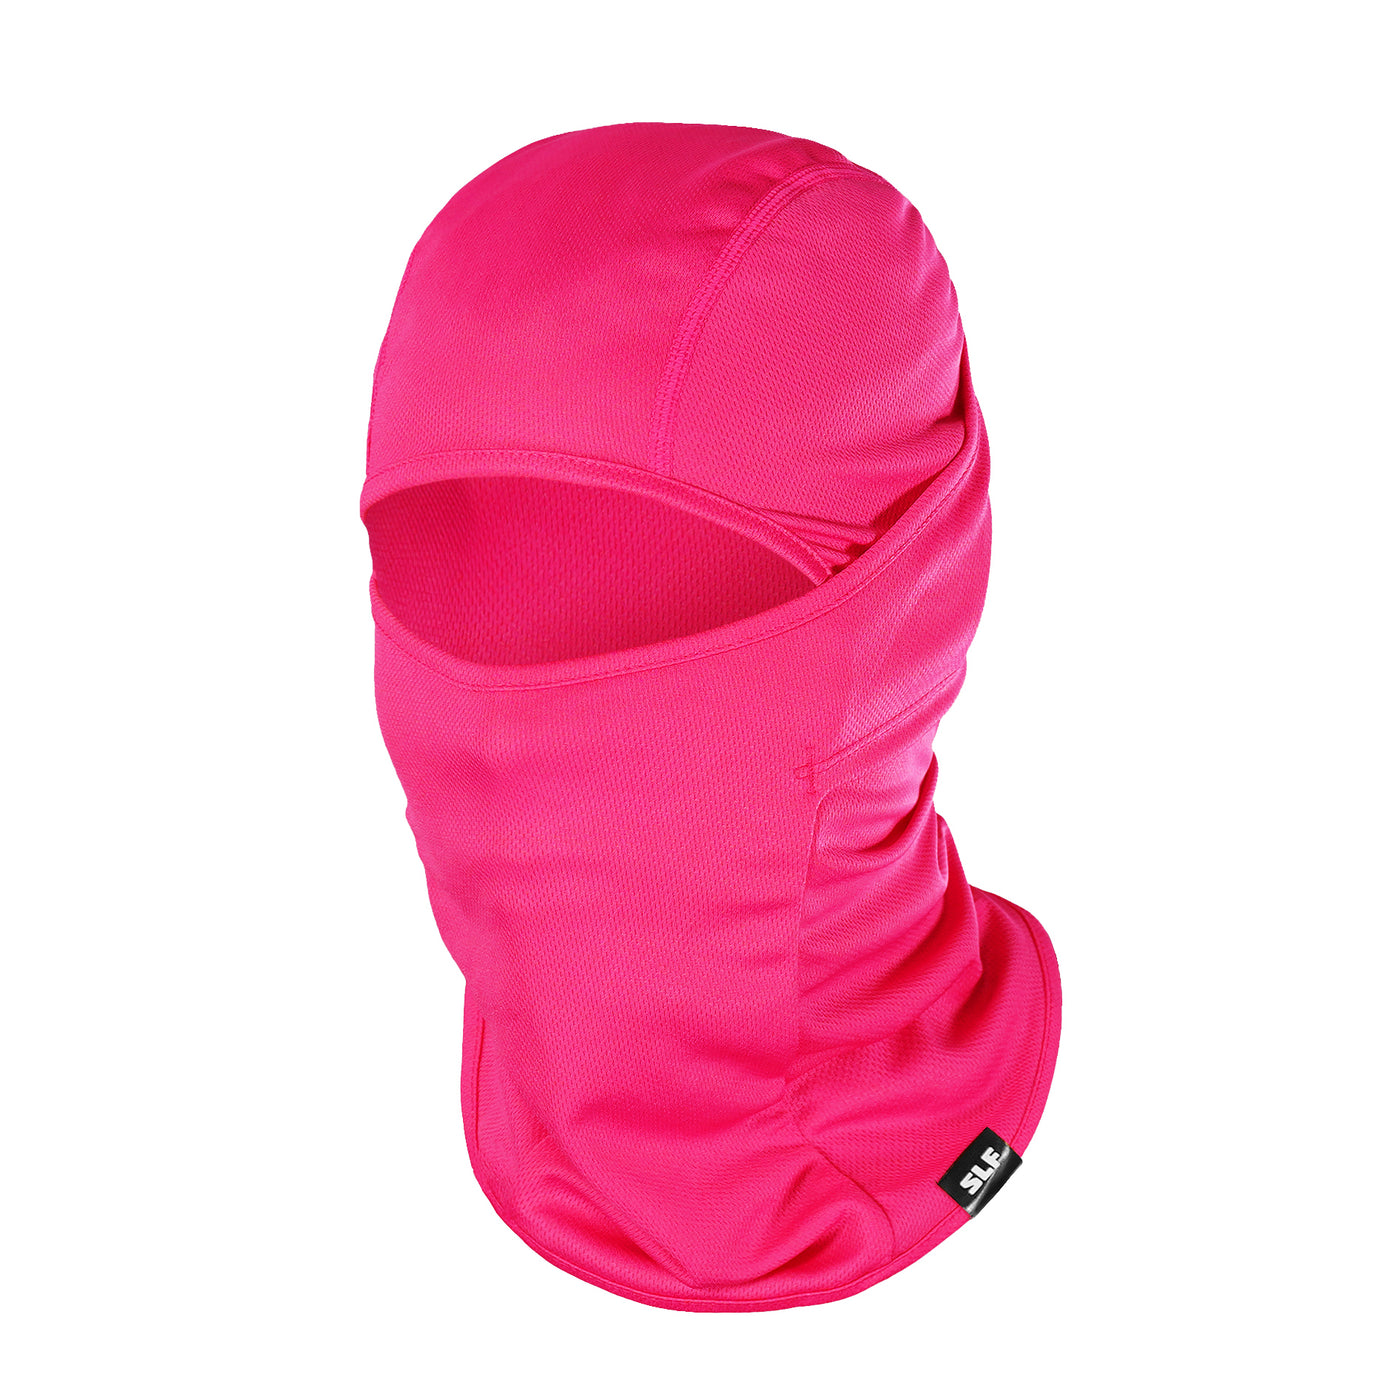 Hue Pink Loose-fitting Shiesty Mask